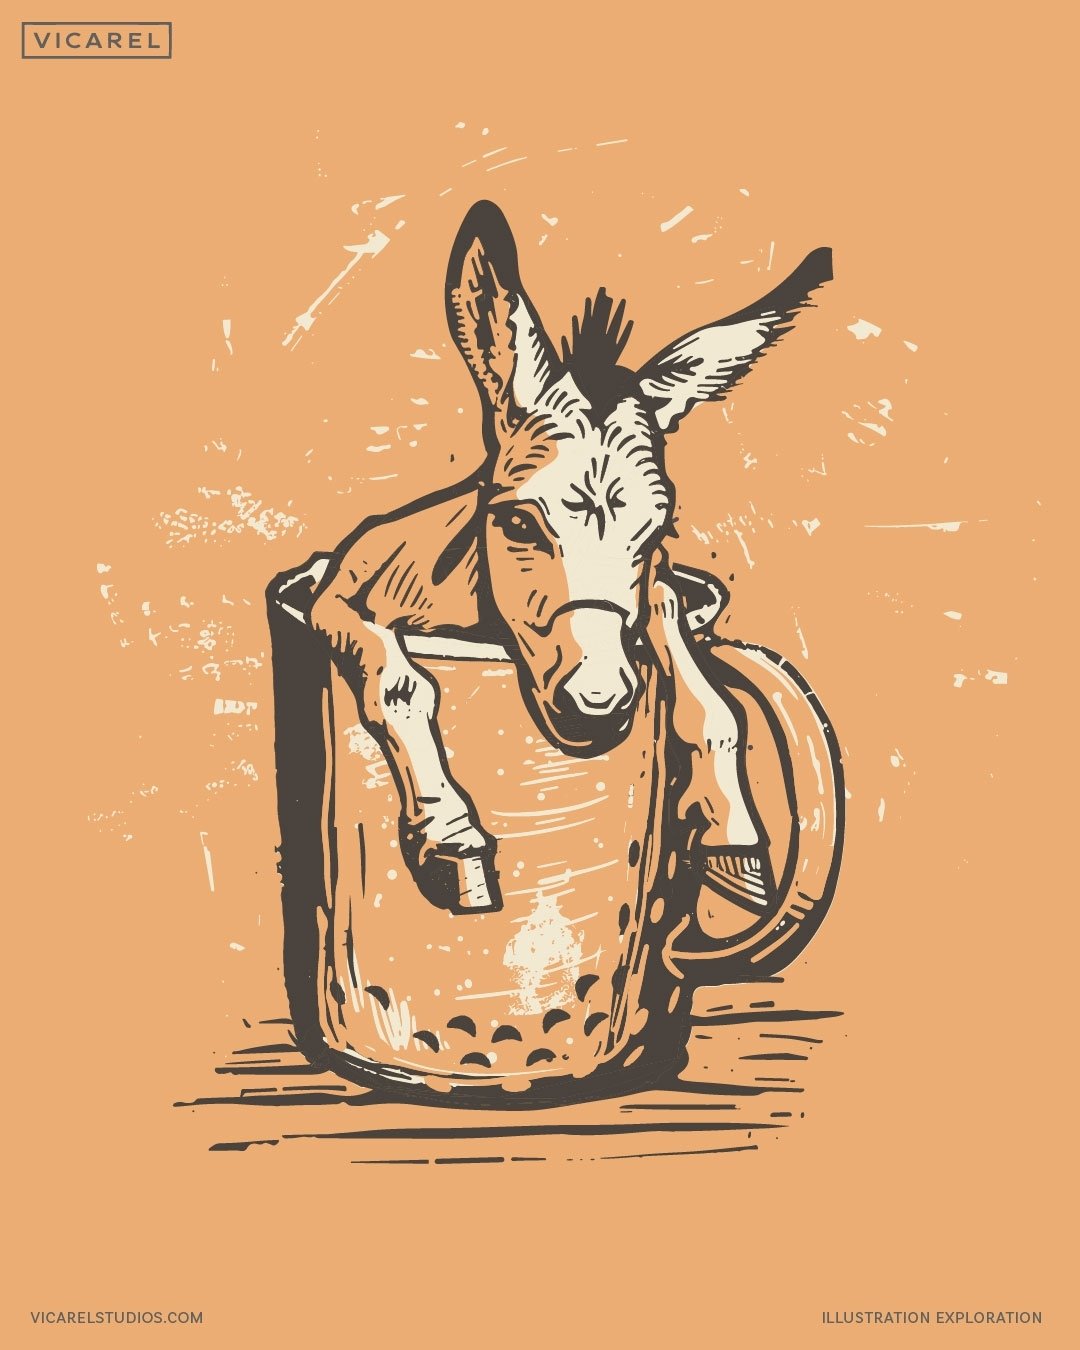 3.5 days in Texas with only 17hrs of total sleep, big meetings, big keynotes, big friend hugs, and many beers &mdash; my cup is so full, but I'm kinda feelin' like this buzzed lil mule. 😄
.
To all the design buds, old and new, what a delight it was 